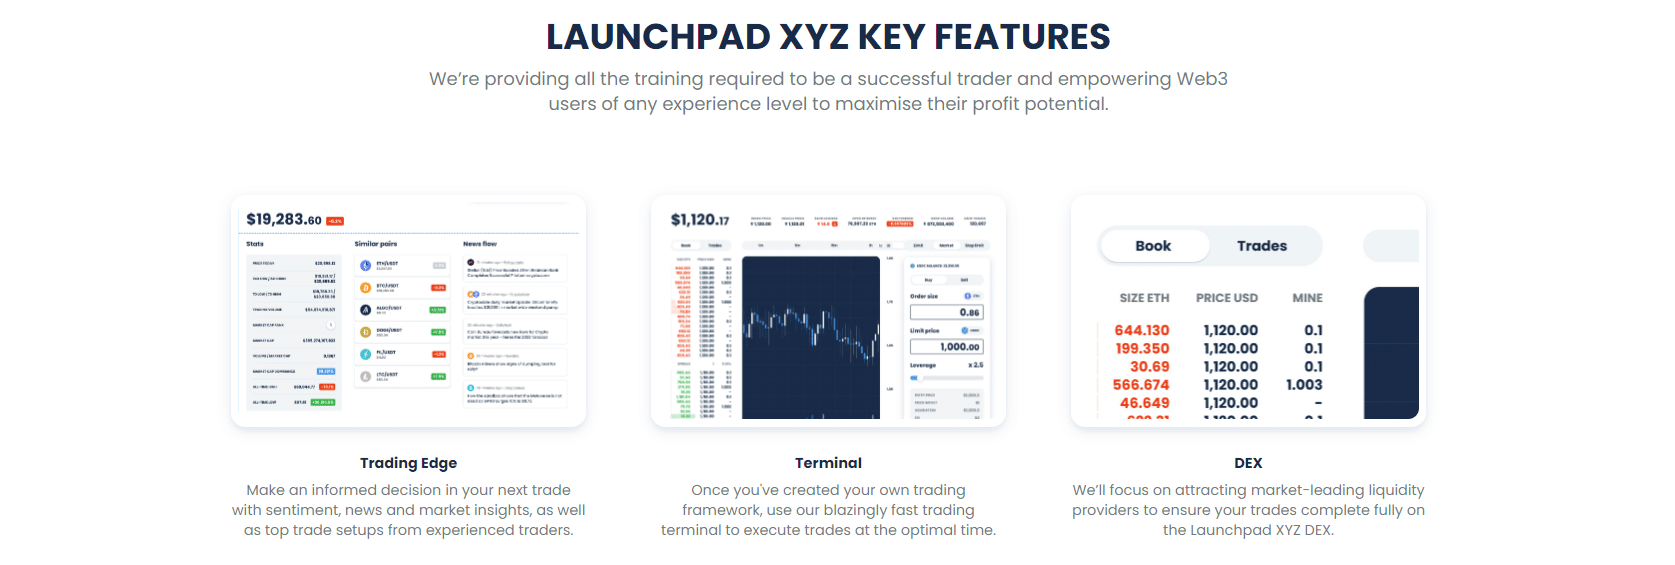 launchpad xyz features